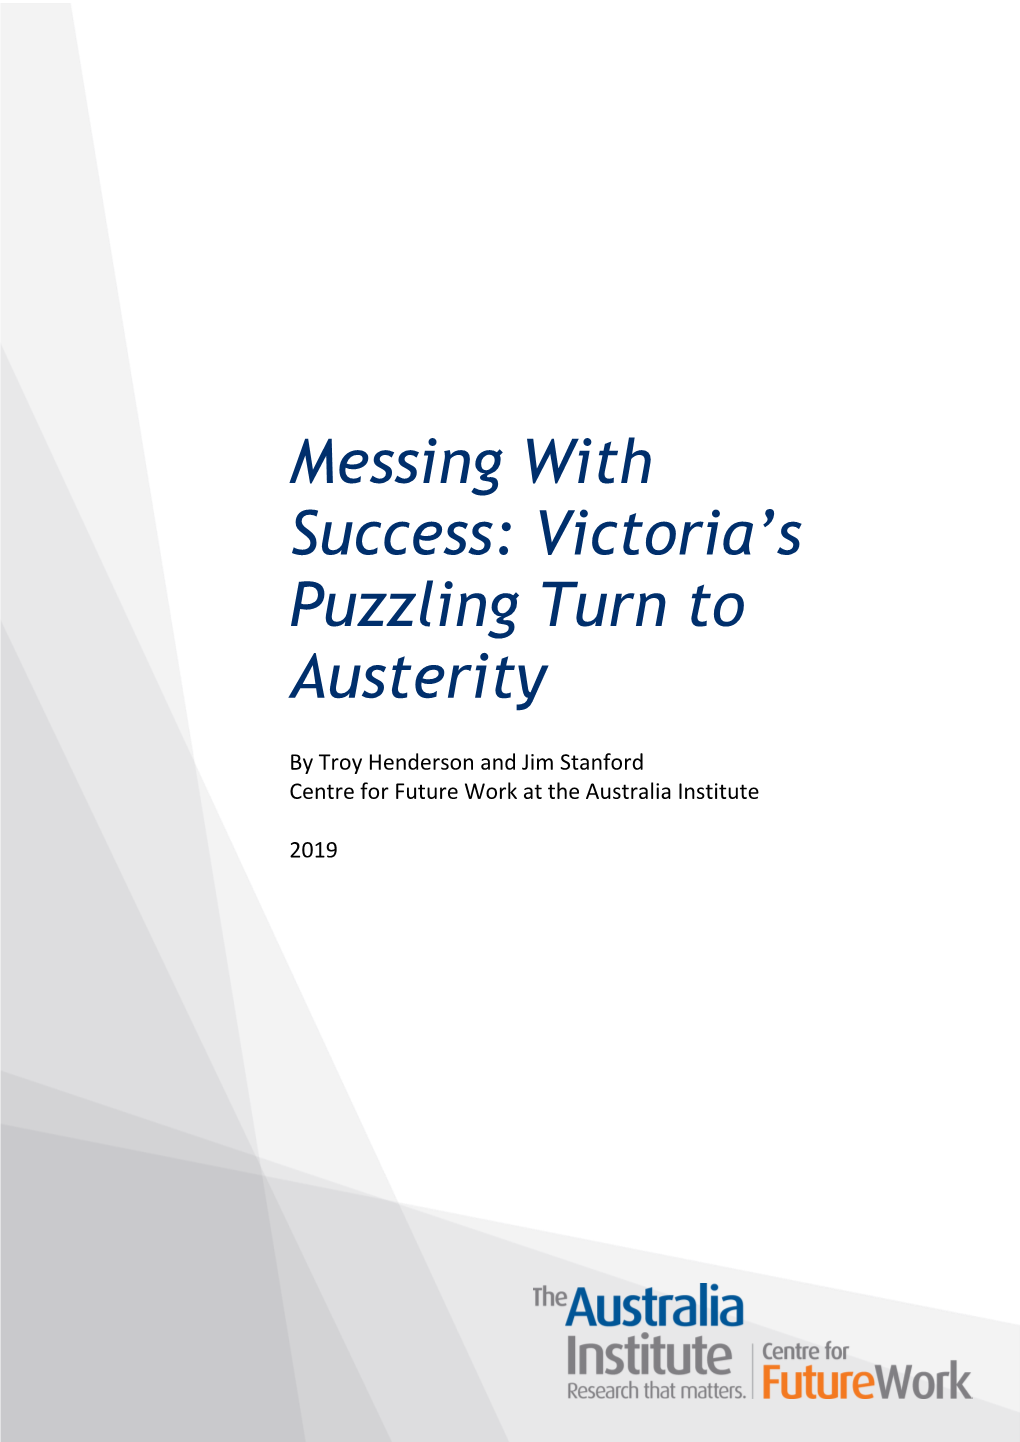 Messing with Success: Victoria's Puzzling Turn to Austerity